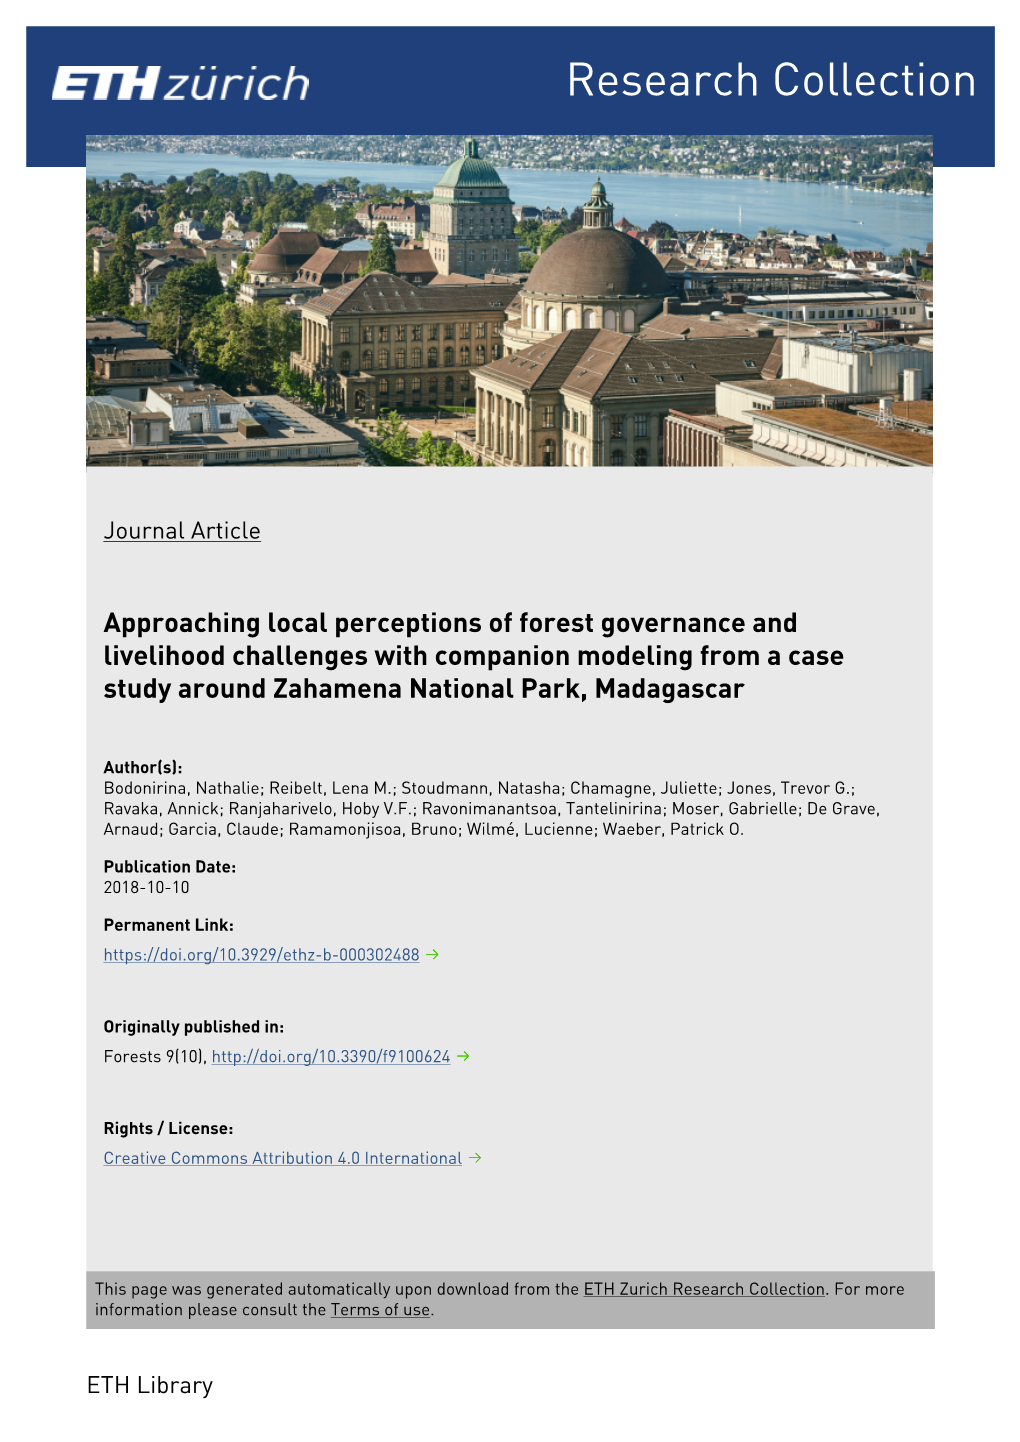 Approaching Local Perceptions of Forest Governance and Livelihood Challenges with Companion Modeling from a Case Study Around Zahamena National Park, Madagascar